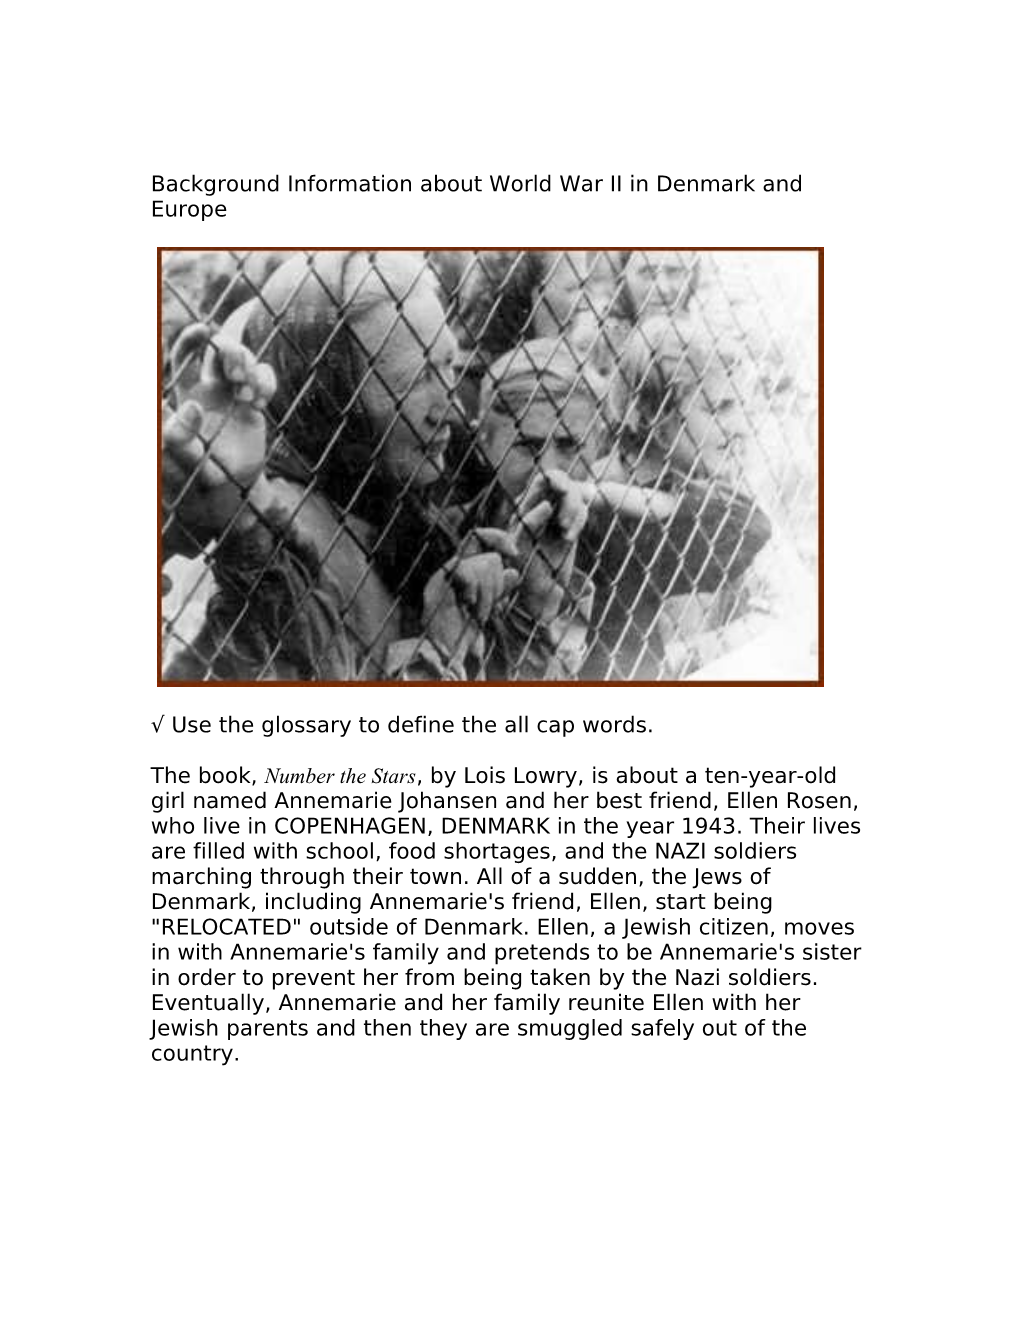 Background Information About World War II in Denmark and Europe